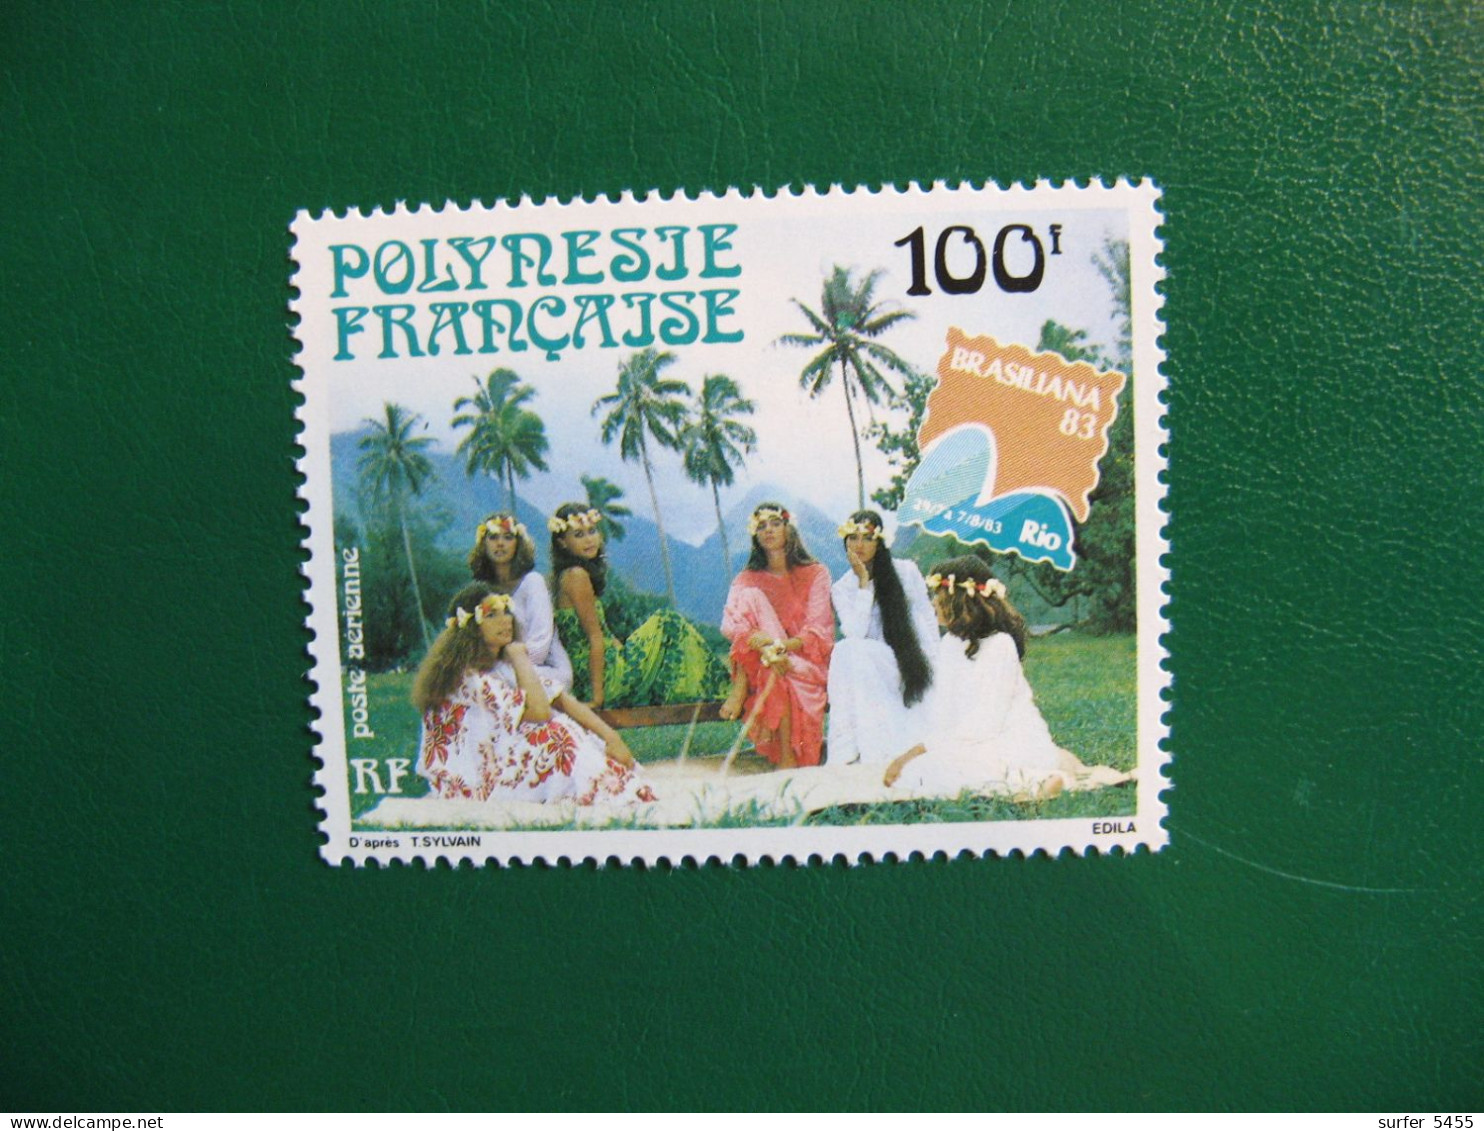 P0LYNESIE PO AERIENNE N° 176 TIMBRE NEUF ** LUXE - MNH - SERIE COMPLETE - FACIALE 0,84 EURO - Ungebraucht